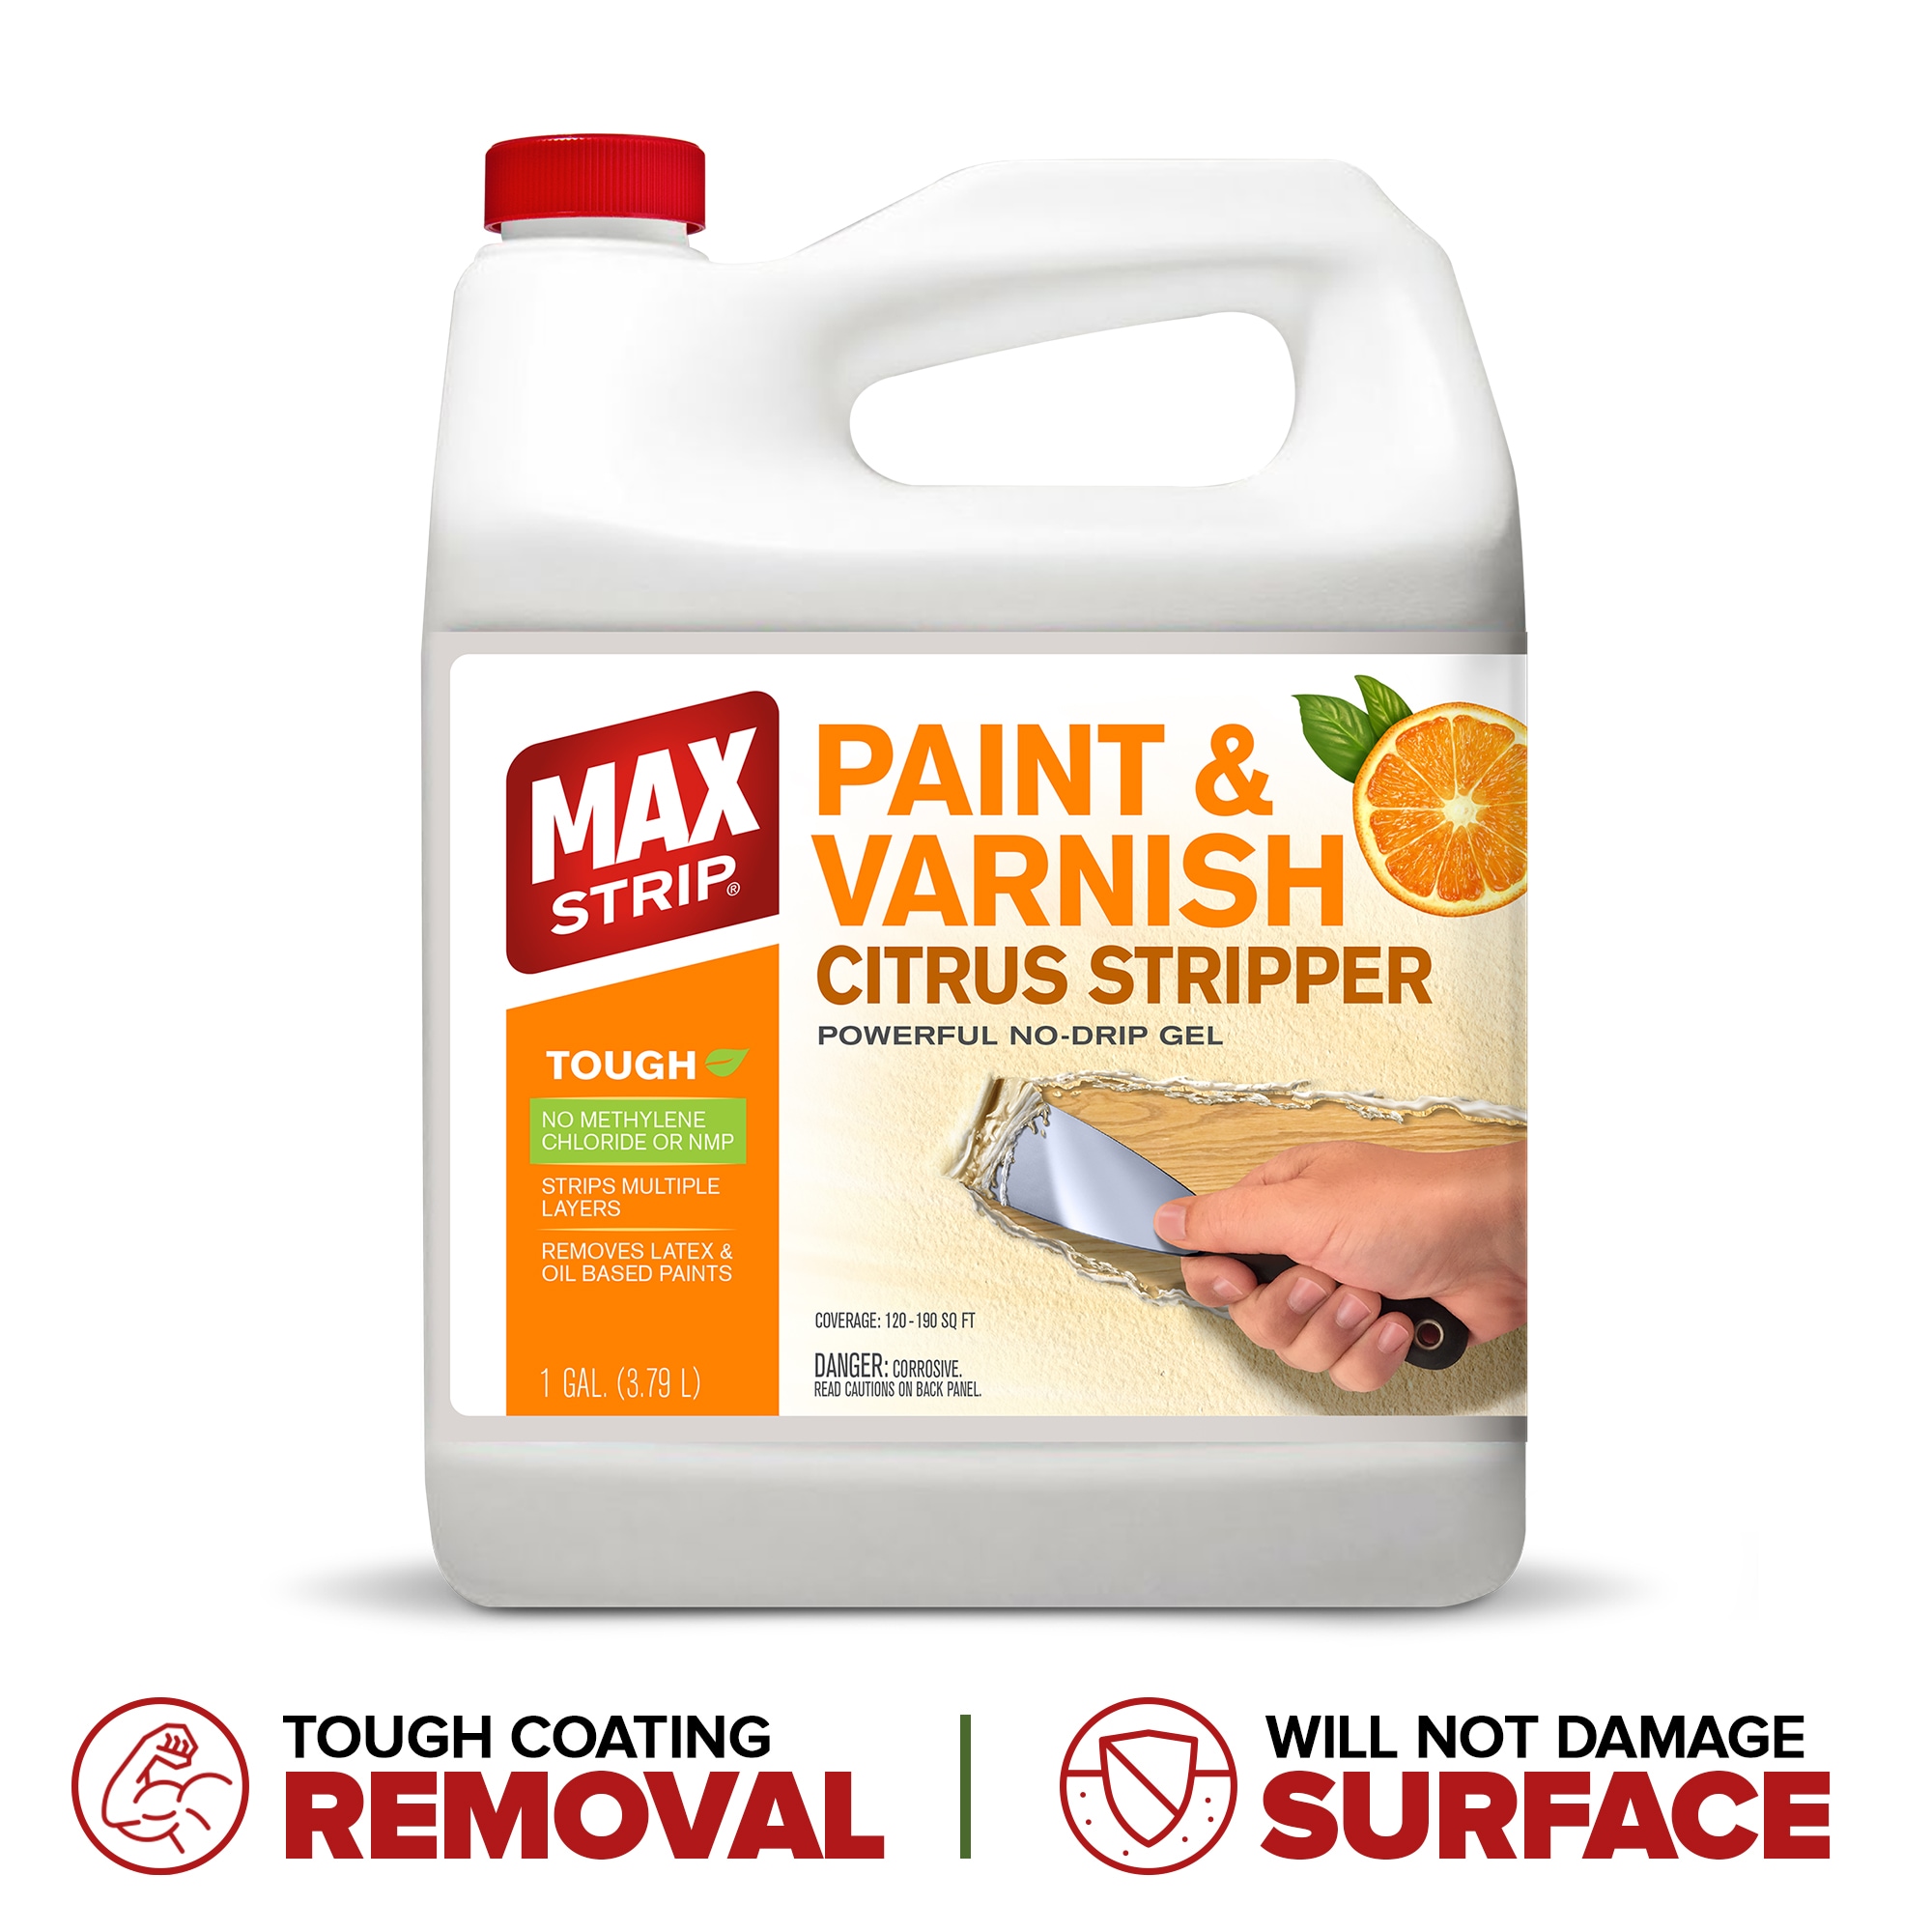 ZAR® Paint and Varnish Remover, Removes All Types of Coatings